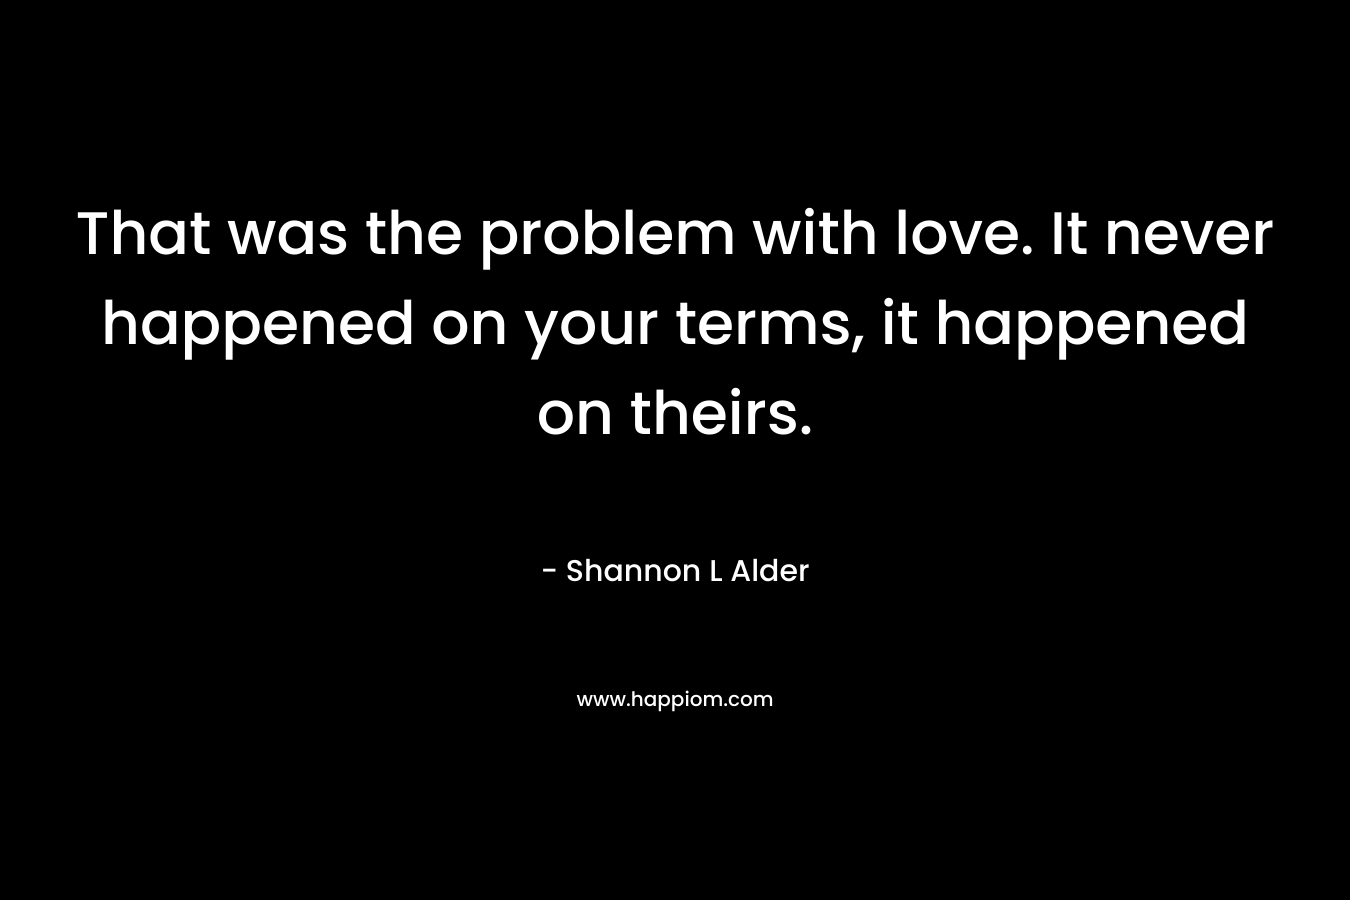 That was the problem with love. It never happened on your terms, it happened on theirs. – Shannon L Alder